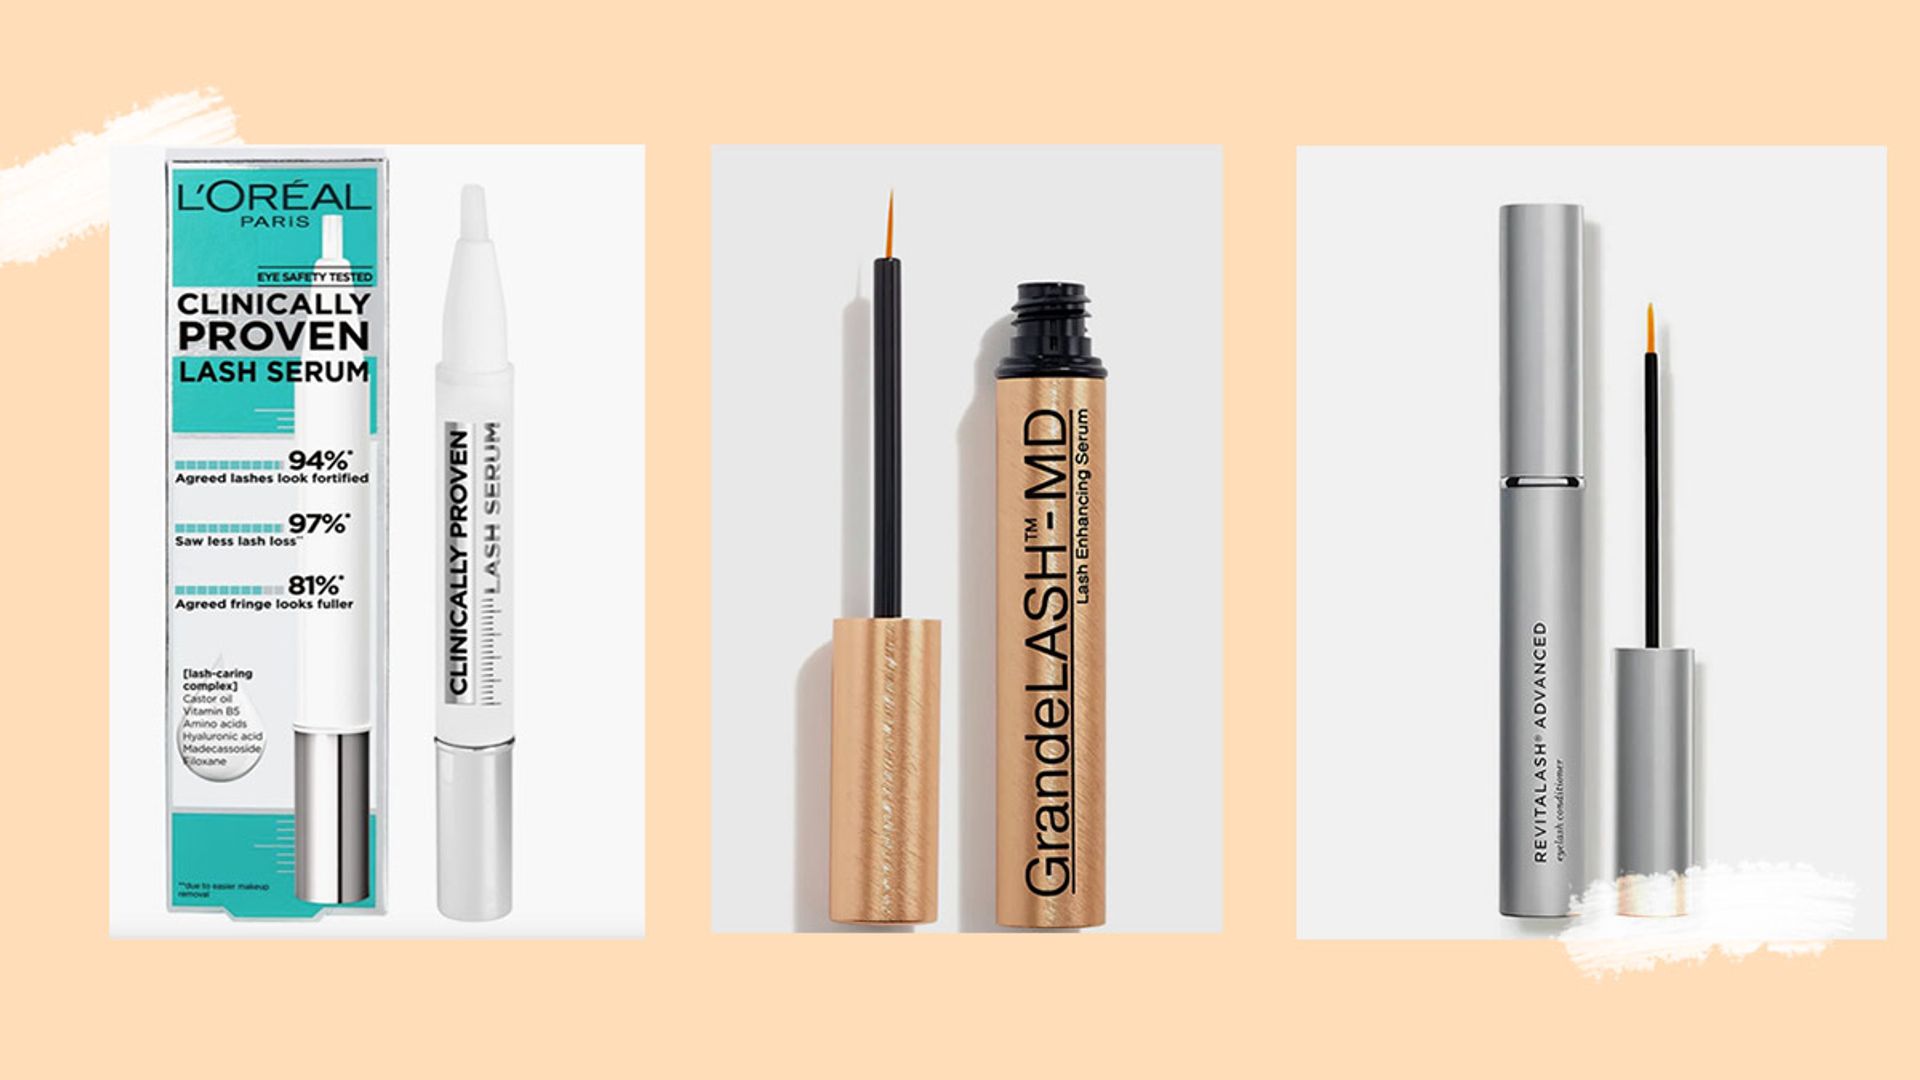 8 best eyelash serums for growth & volume that actually work